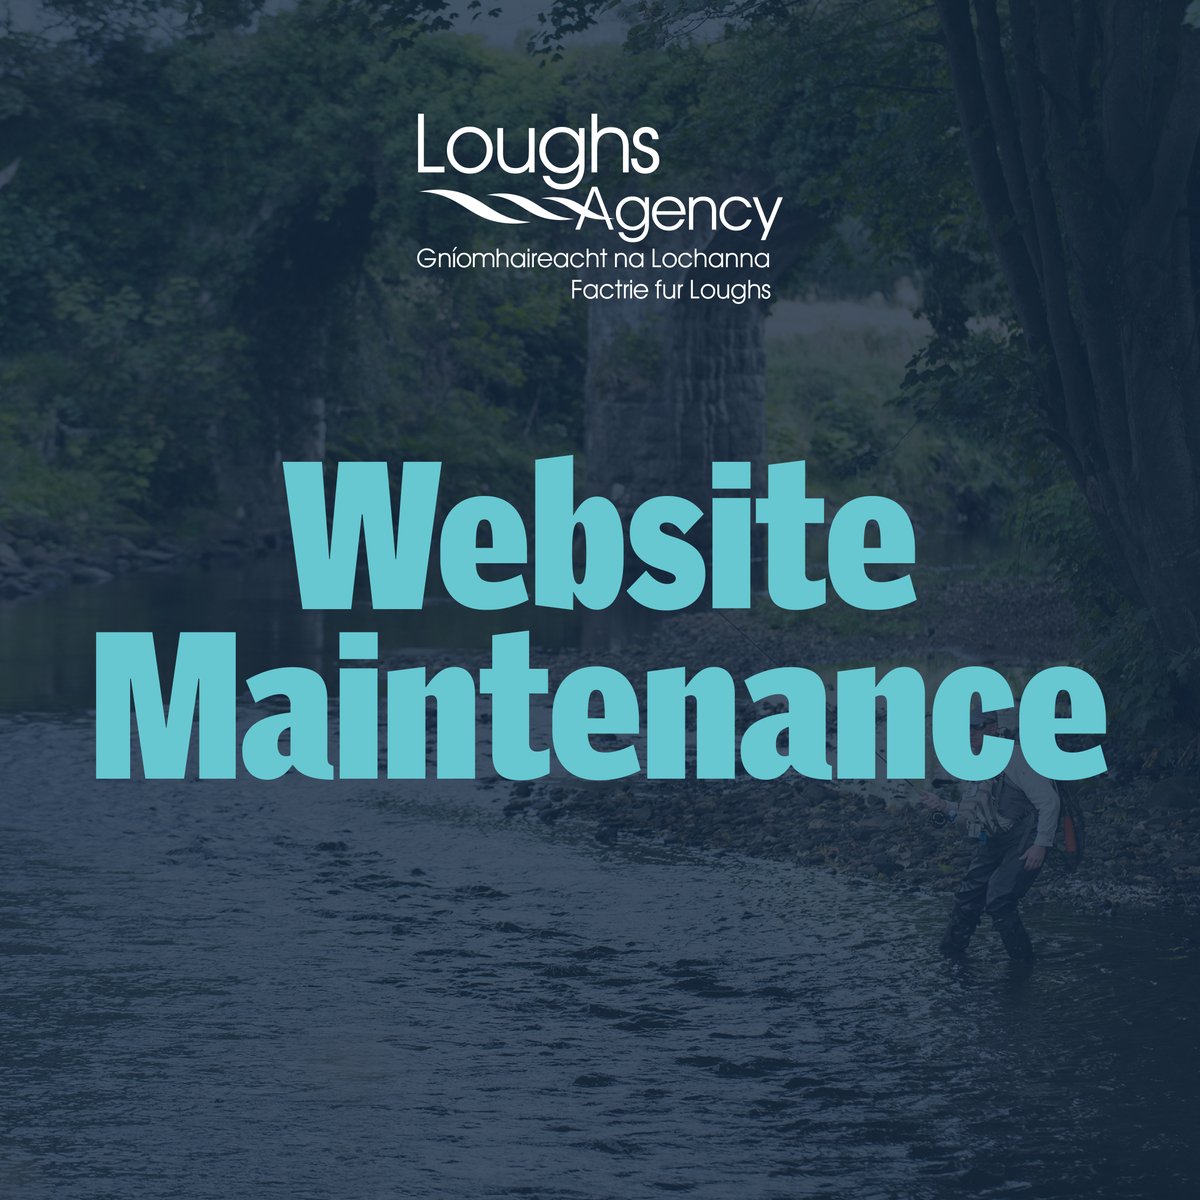 Our website is currently undergoing maintenance ⚙️ To purchase licences, please visit elicence.loughs-agency.org #LoughsAgency